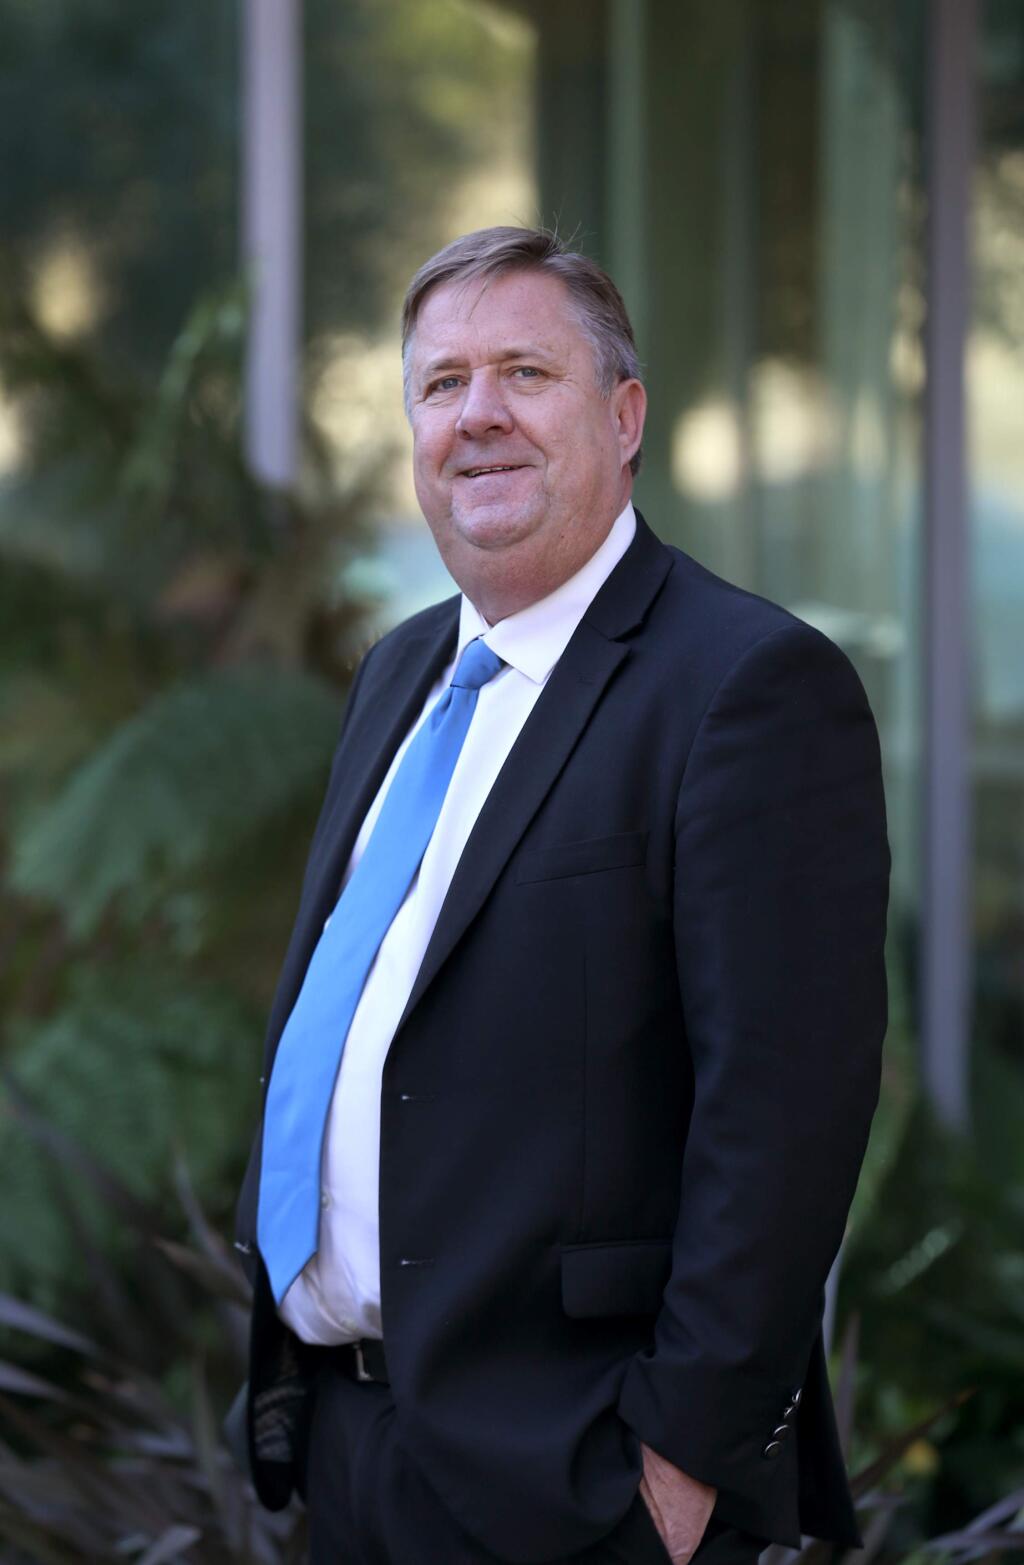 Sonoma City Councilman David Cook ran unsuccessfully for 1st District Supervisor of Sonoma County in early 2020. (BETH SCHLANKER/ The Press Democrat)